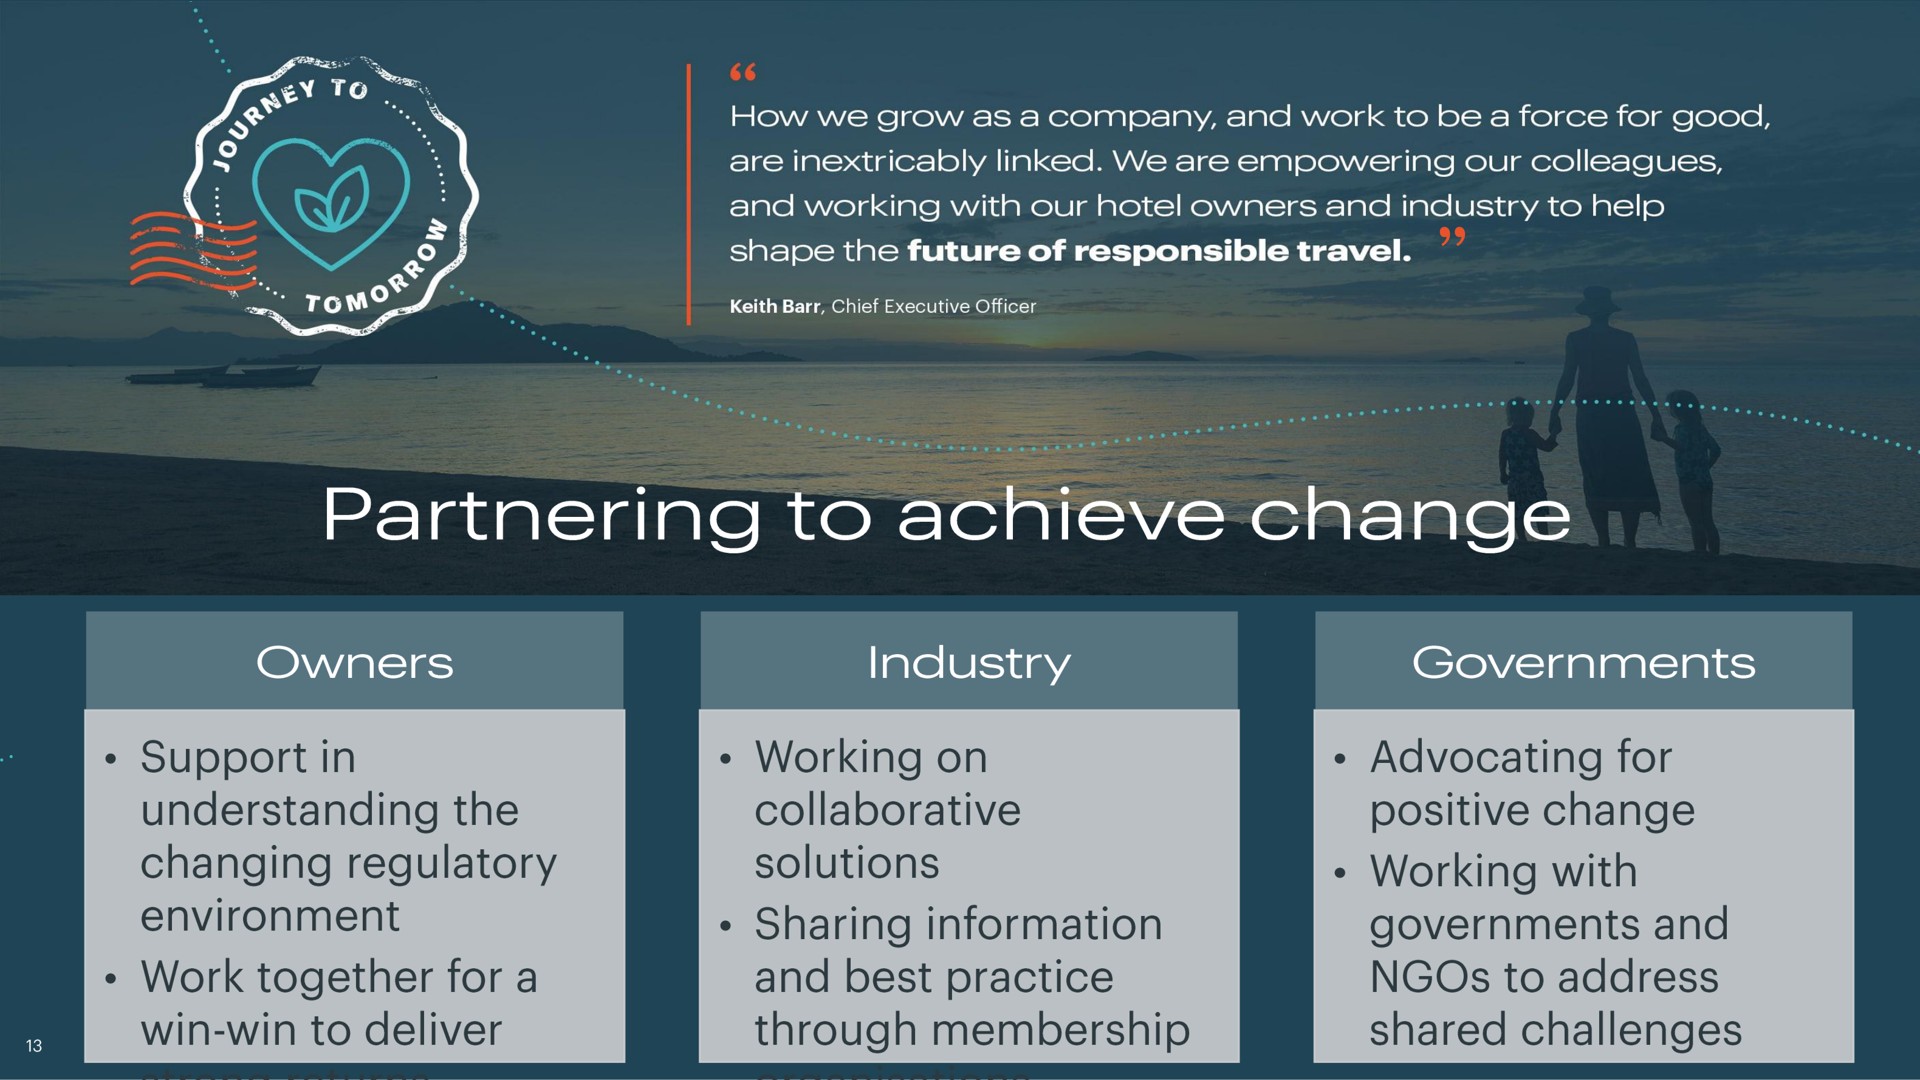 partnering to achieve change environment sharing information | IHG Hotels